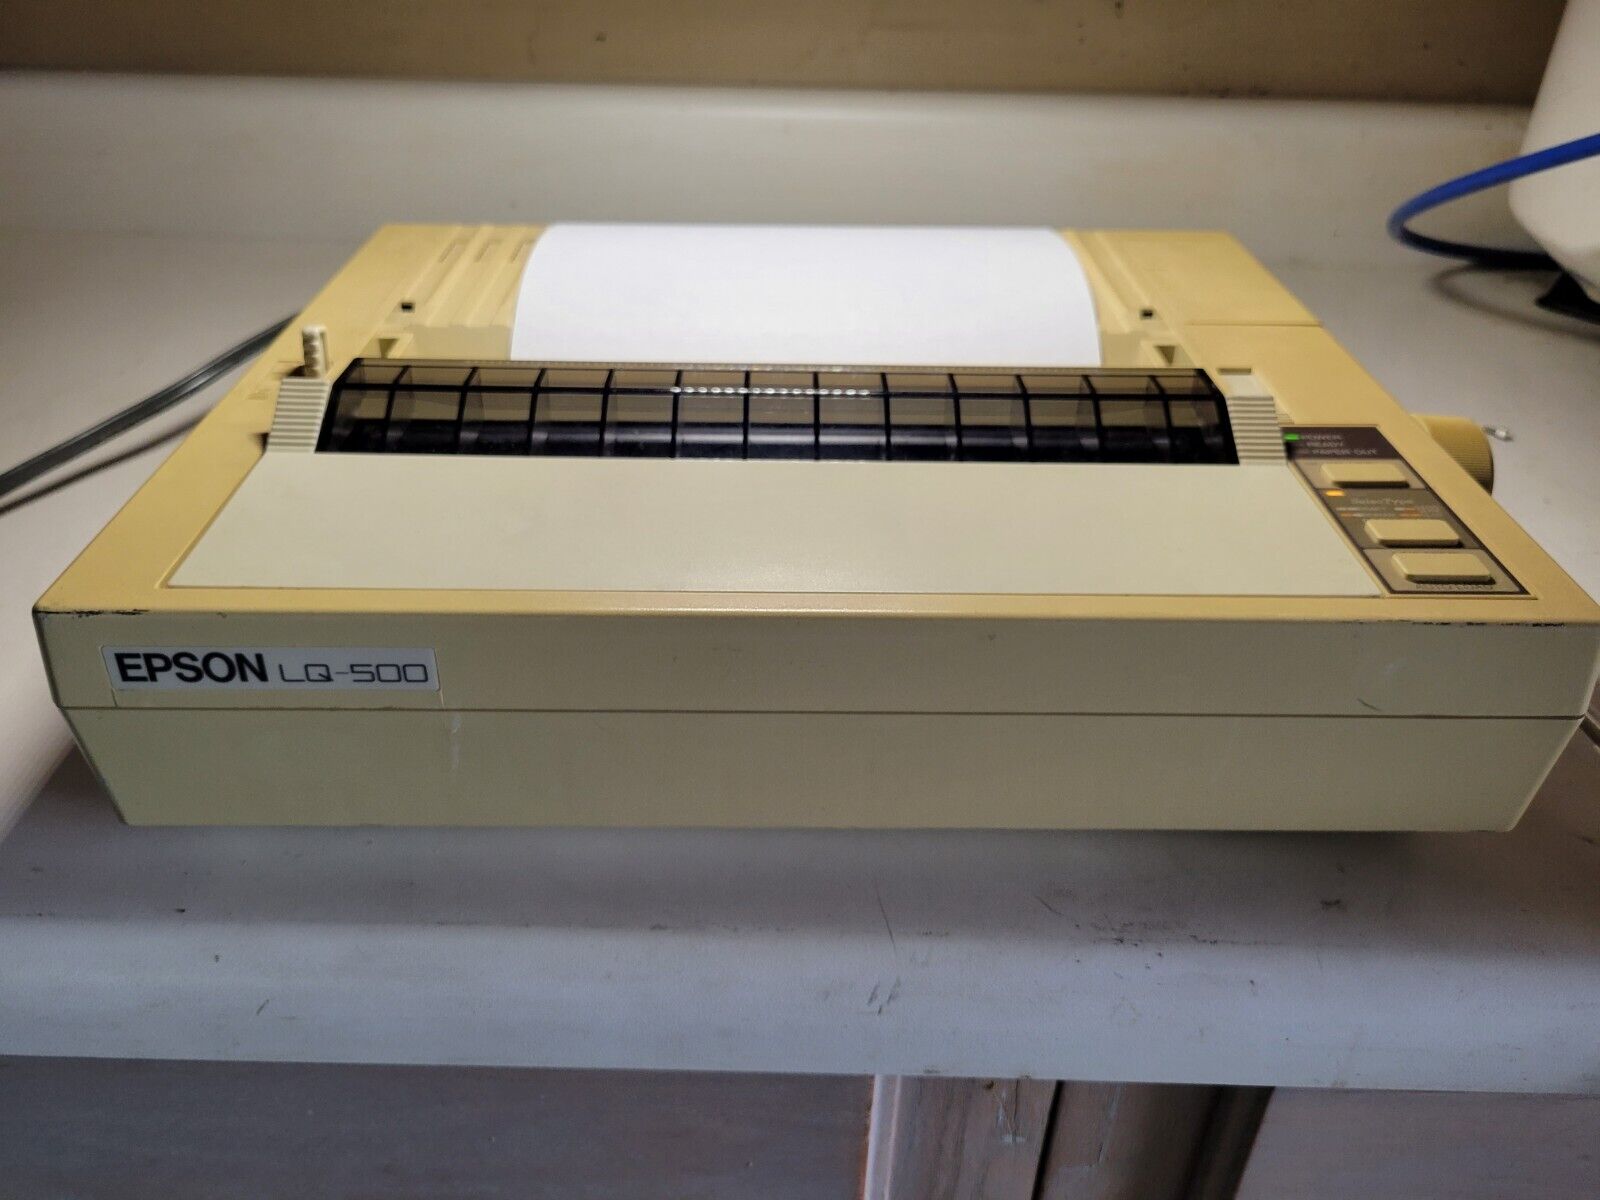 Vintage Epson LQ-500 Printer, Components Tested Without Ink